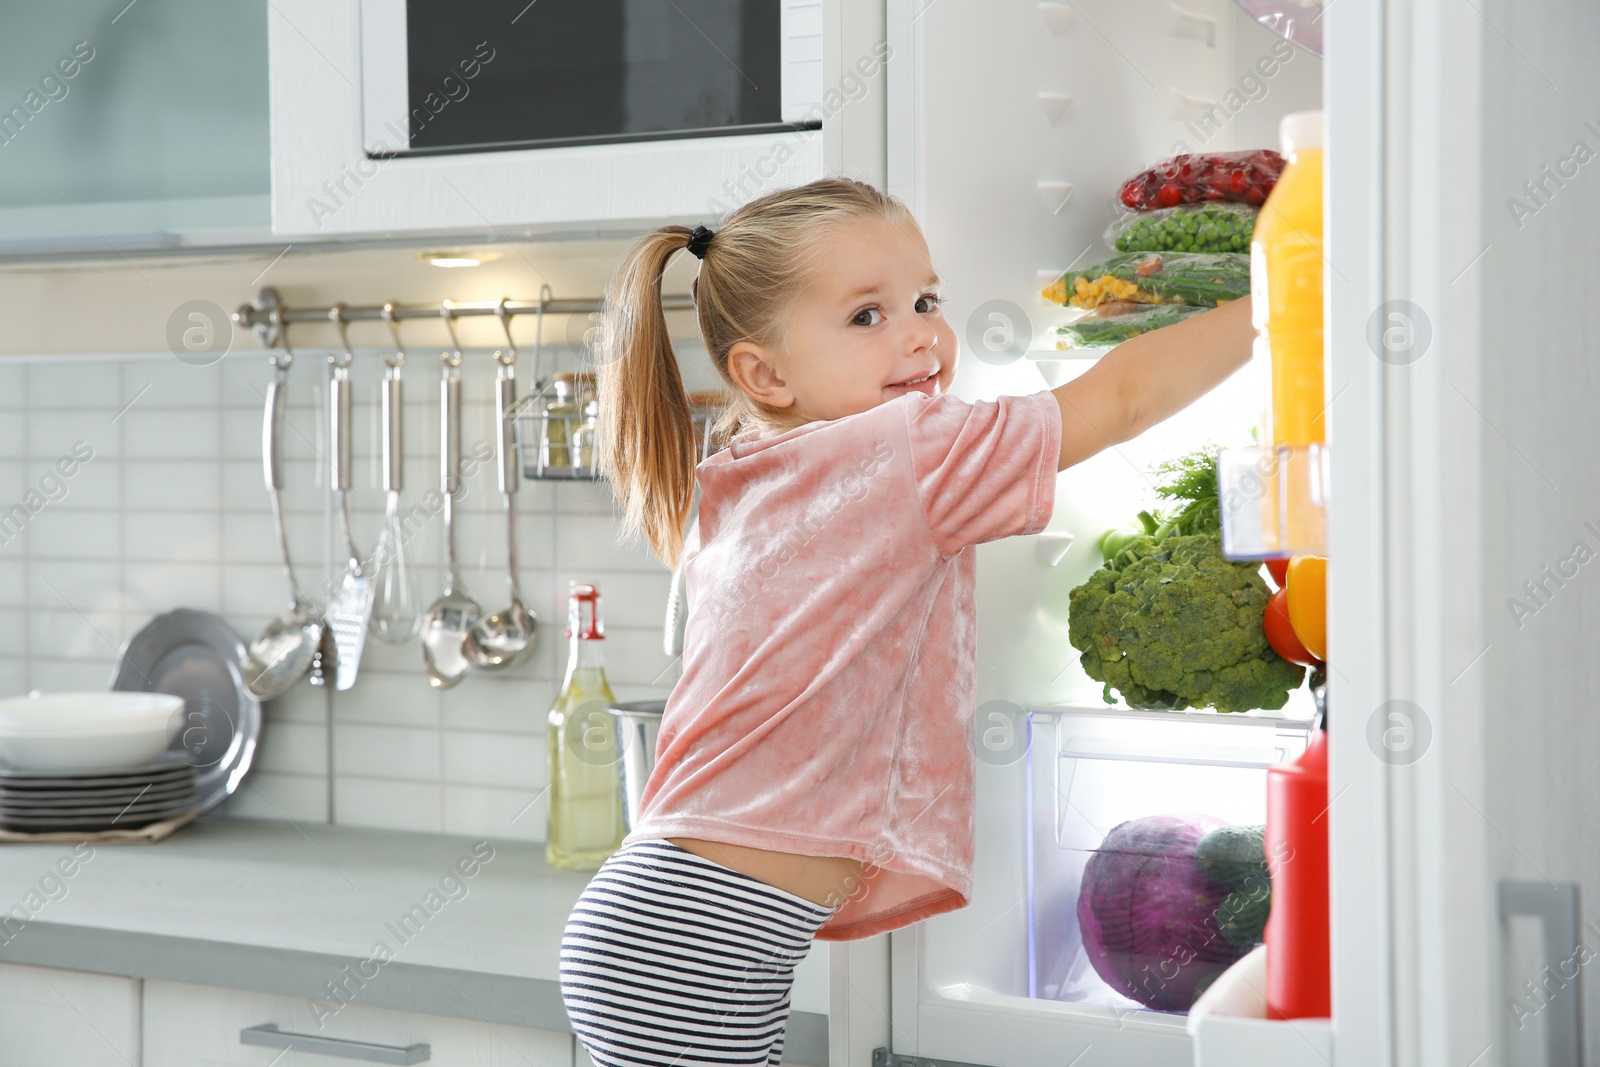 Photo of Cute girl choosing food from refrigerator in kitchen